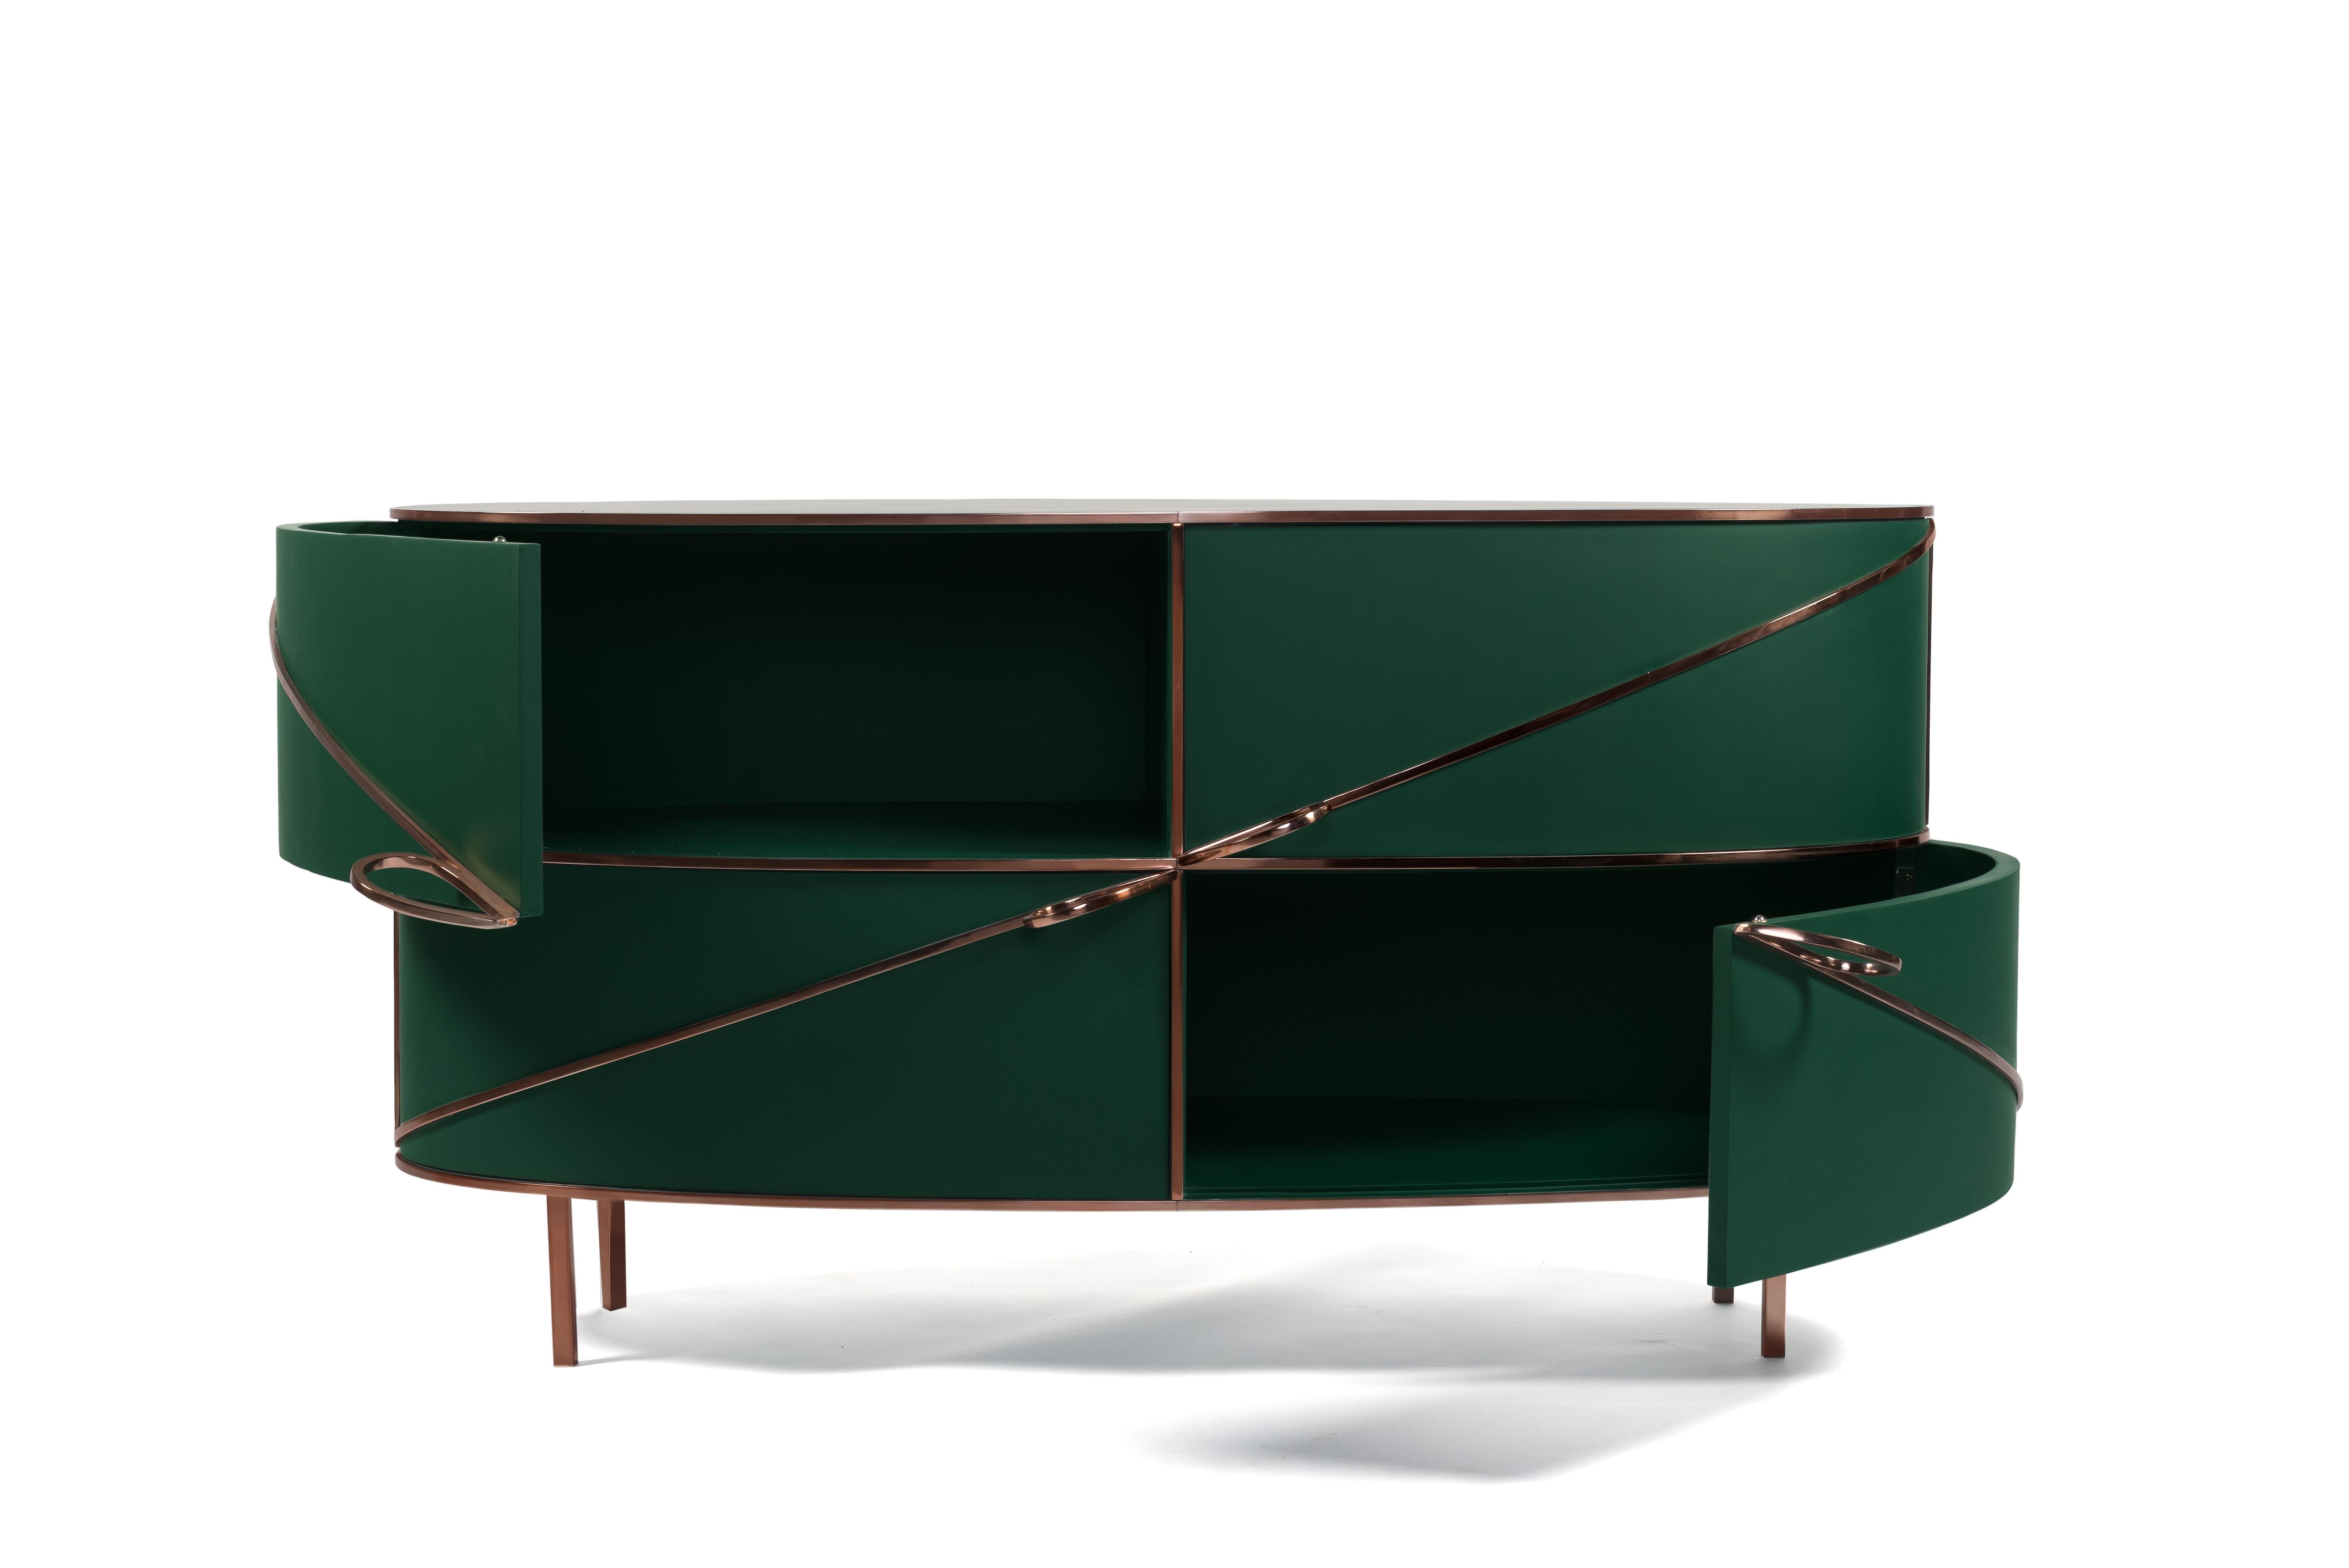 88 Secrets Green Sideboard with Rose Gold Trims by Nika Zupanc is a deep green cabinet in sensuous, feminine lines with luxurious metal trims in rose gold. A statement piece in any interior space!

Nika Zupanc, a strikingly renowned Slovenian